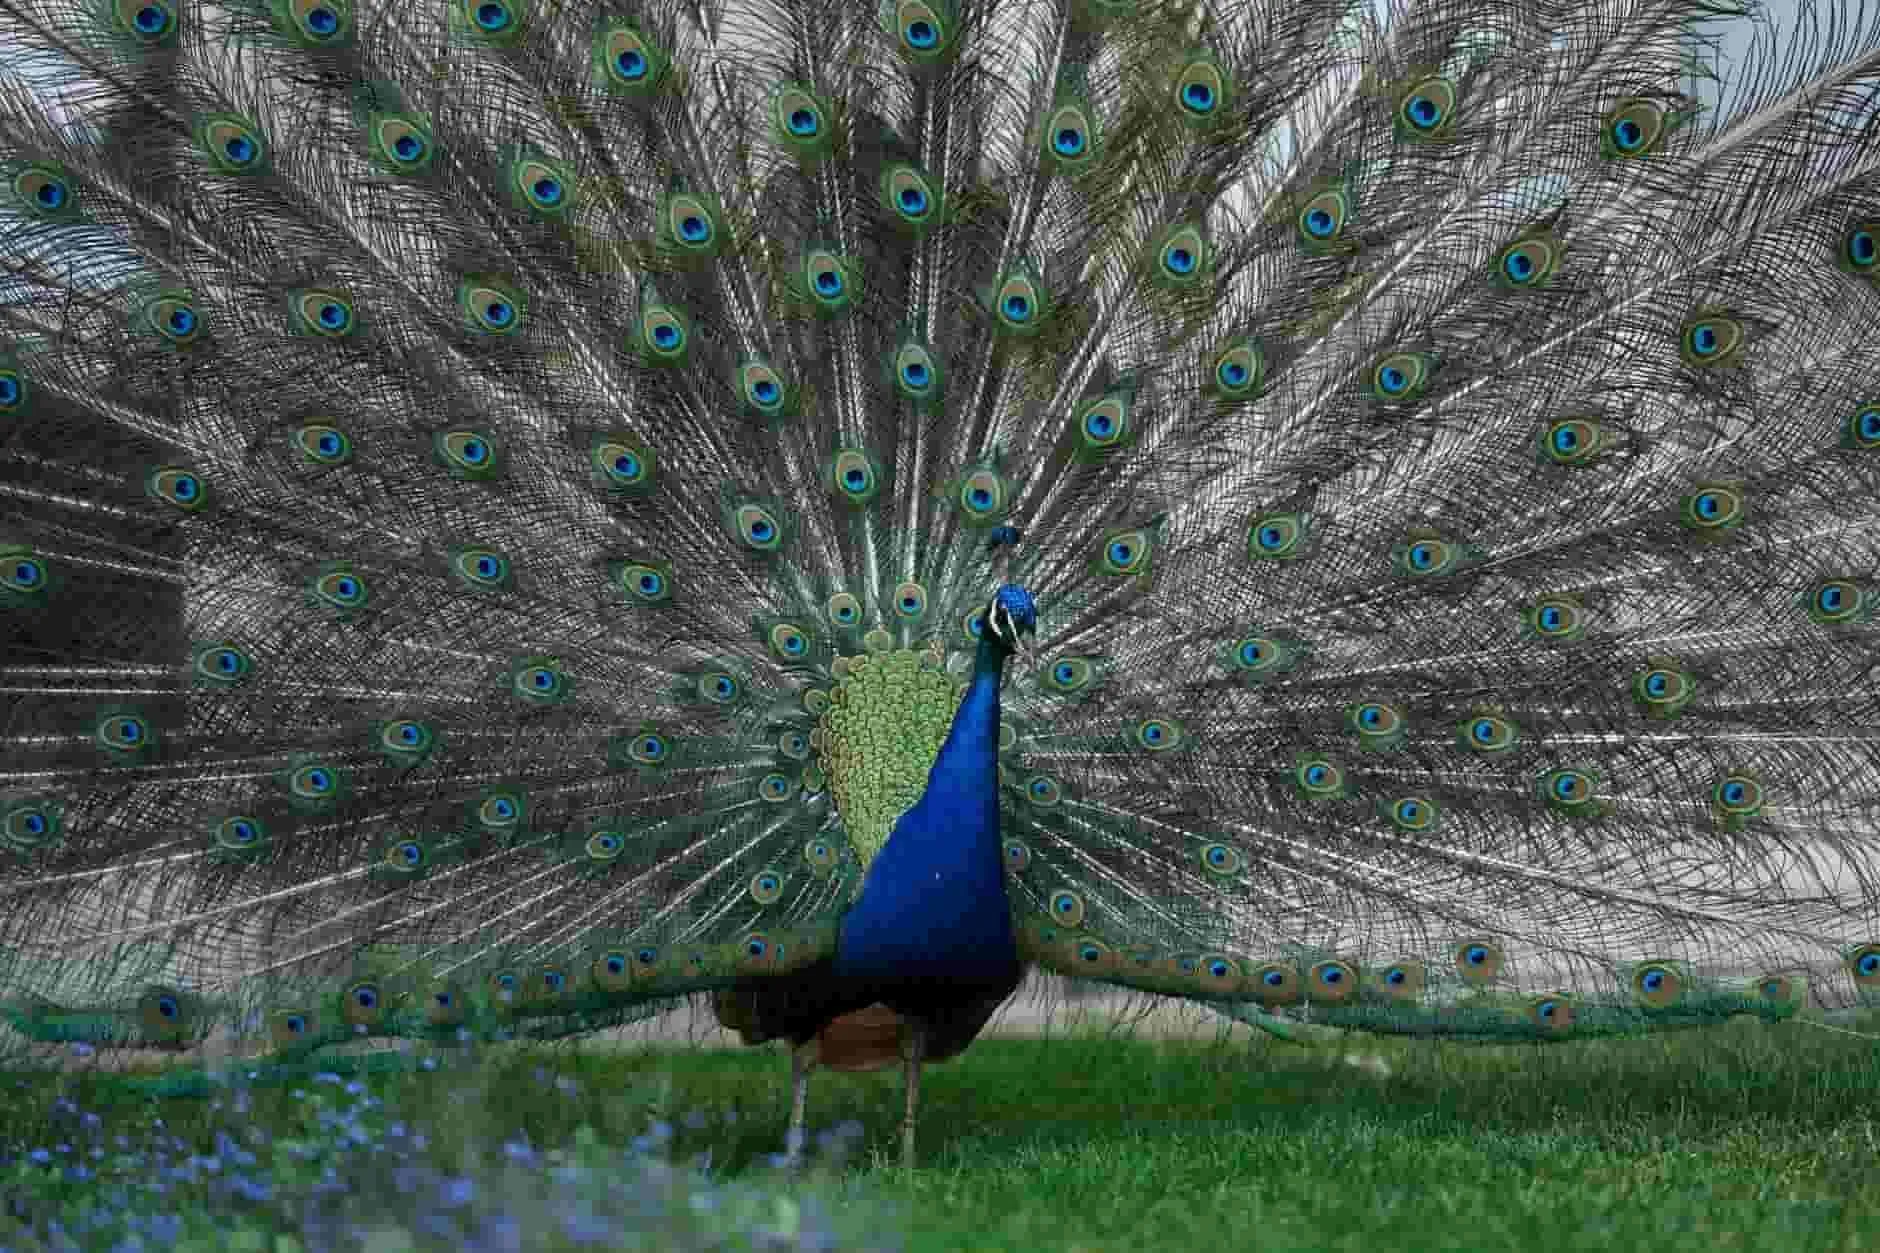 The peacock is a beautiful bird that is also the national bird of India.